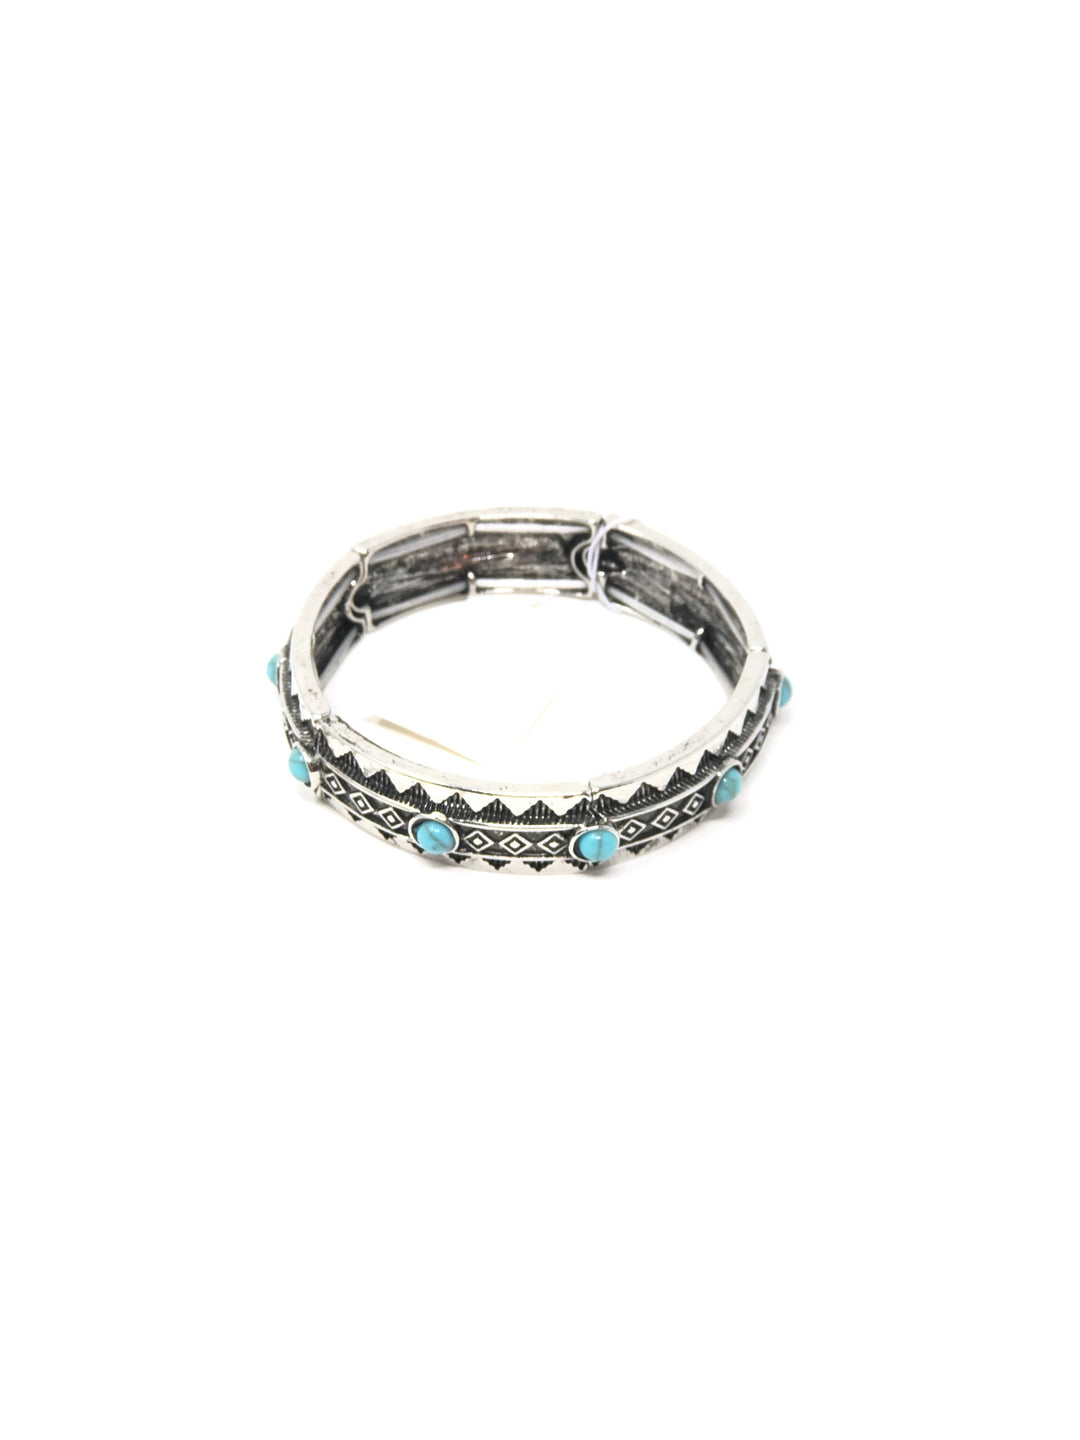 Silver and Turquoise Western Bracelet